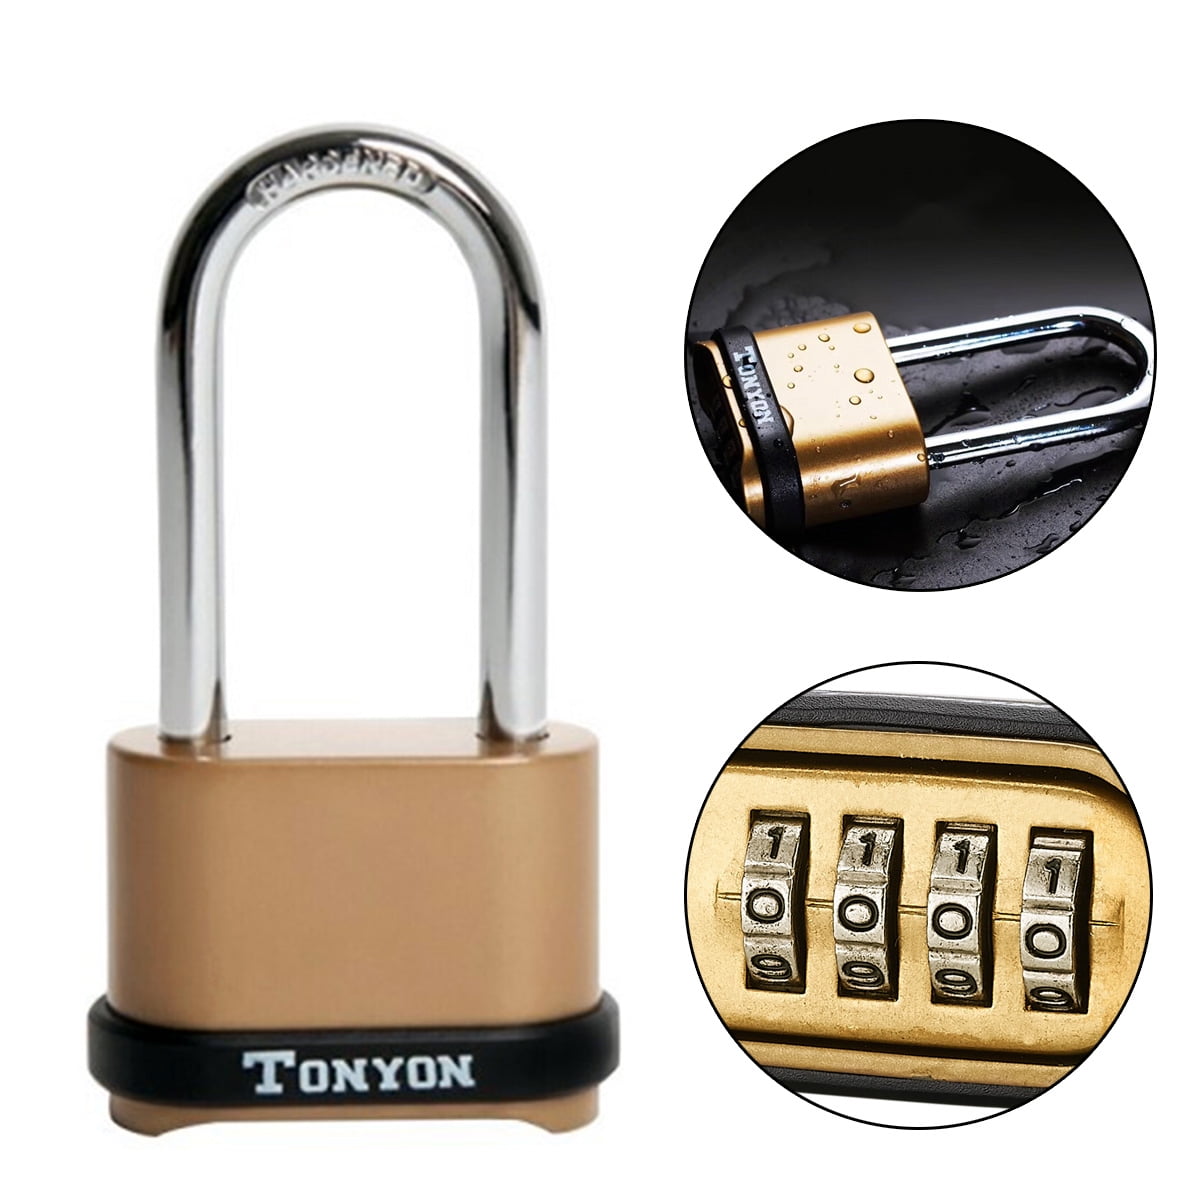 Color : Black, Size : Small MUMA 4 Digital Combination Lock Security Waterproof Number Padlock Resettable Locks For Gym School Office Home Or Outdoor Shed